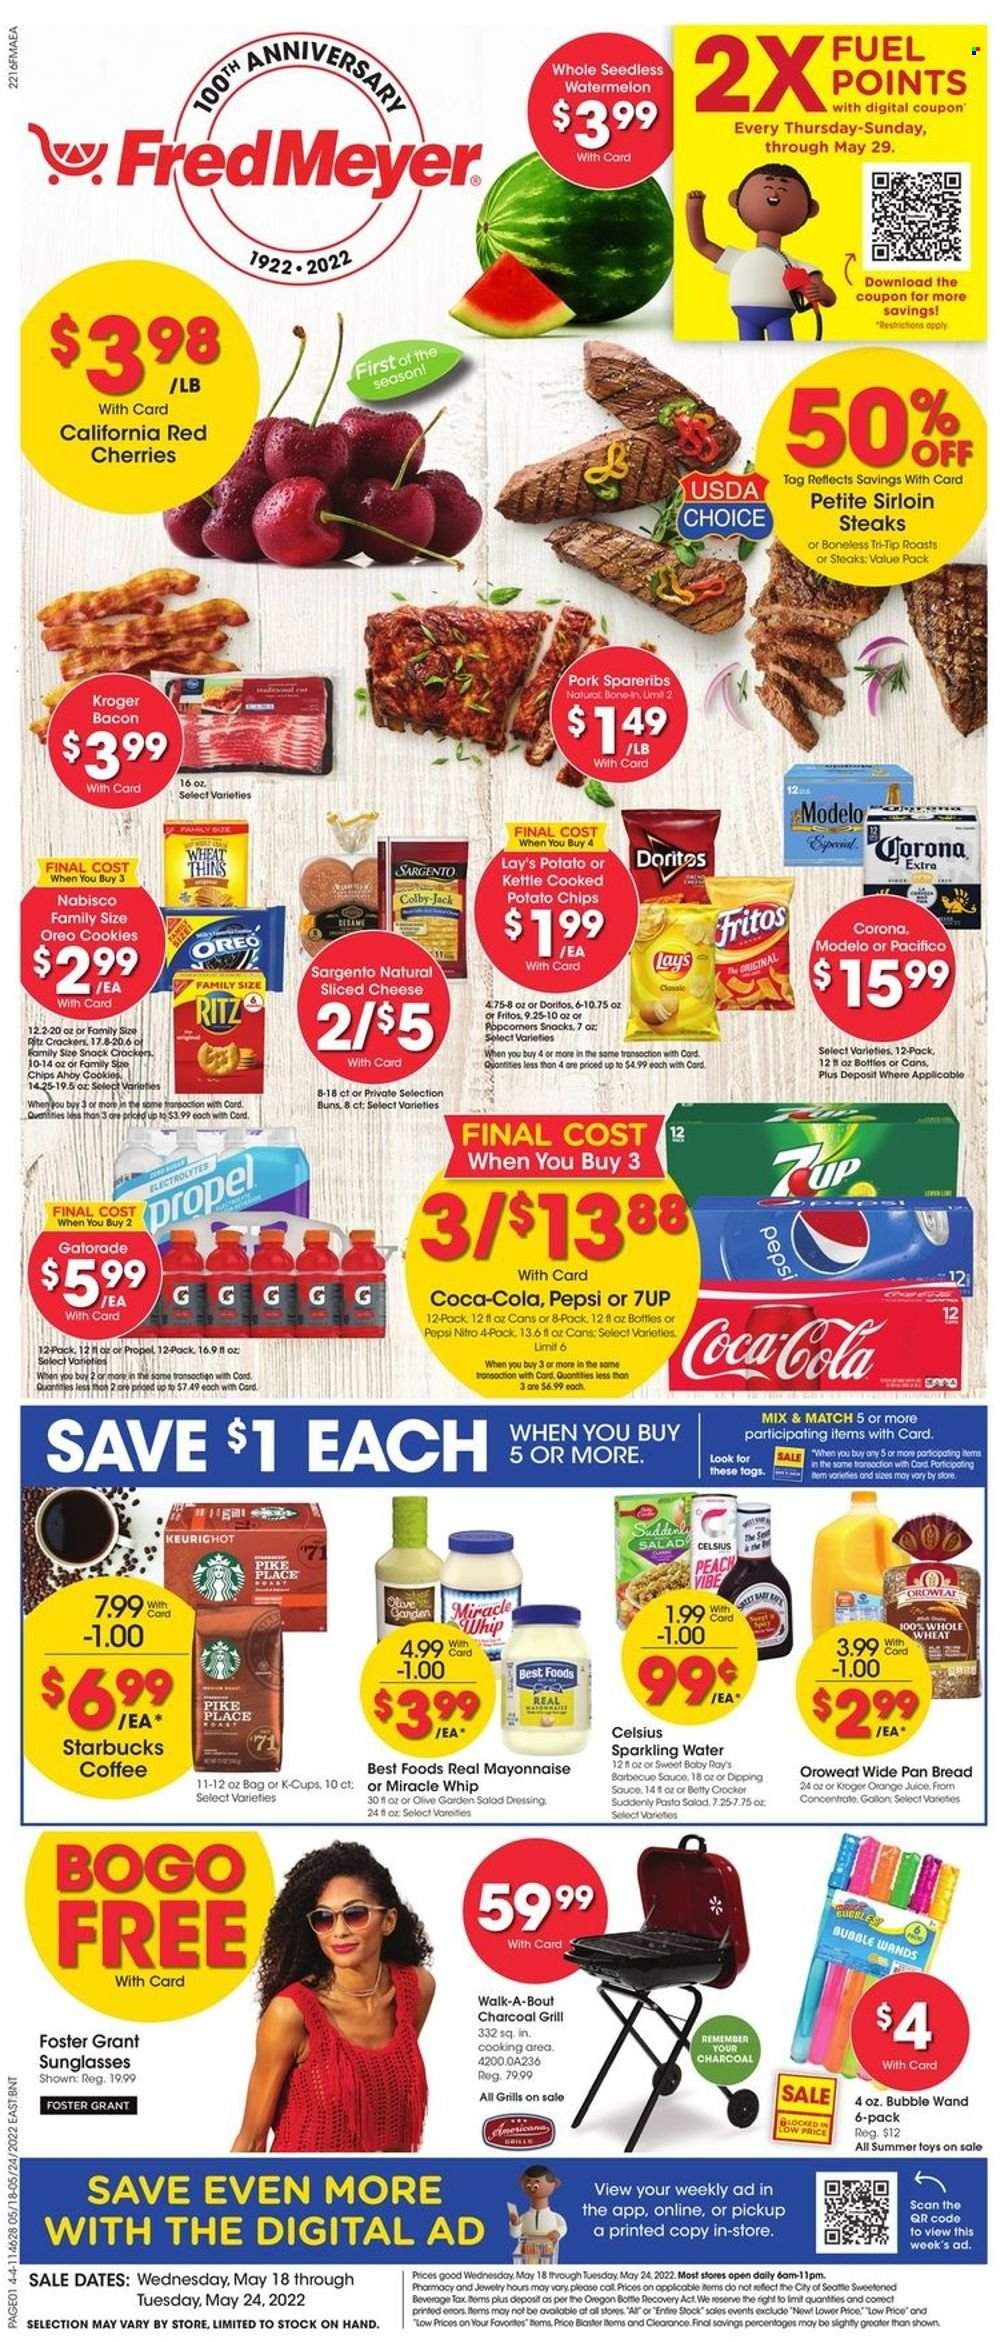 thumbnail - Fred Meyer Flyer - 05/18/2022 - 05/24/2022 - Sales products - bread, buns, watermelon, cherries, pasta, bacon, pasta salad, Colby cheese, sliced cheese, Sargento, Oreo, mayonnaise, Miracle Whip, cookies, snack, crackers, RITZ, Doritos, Fritos, potato chips, chips, Lay’s, Thins, popcorn, dressing, Coca-Cola, Pepsi, orange juice, juice, 7UP, Gatorade, sparkling water, coffee, Starbucks, coffee capsules, K-Cups, beer, Corona Extra, Modelo, steak, sirloin steak, pork spare ribs, pan, sunglasses, toys. Page 1.